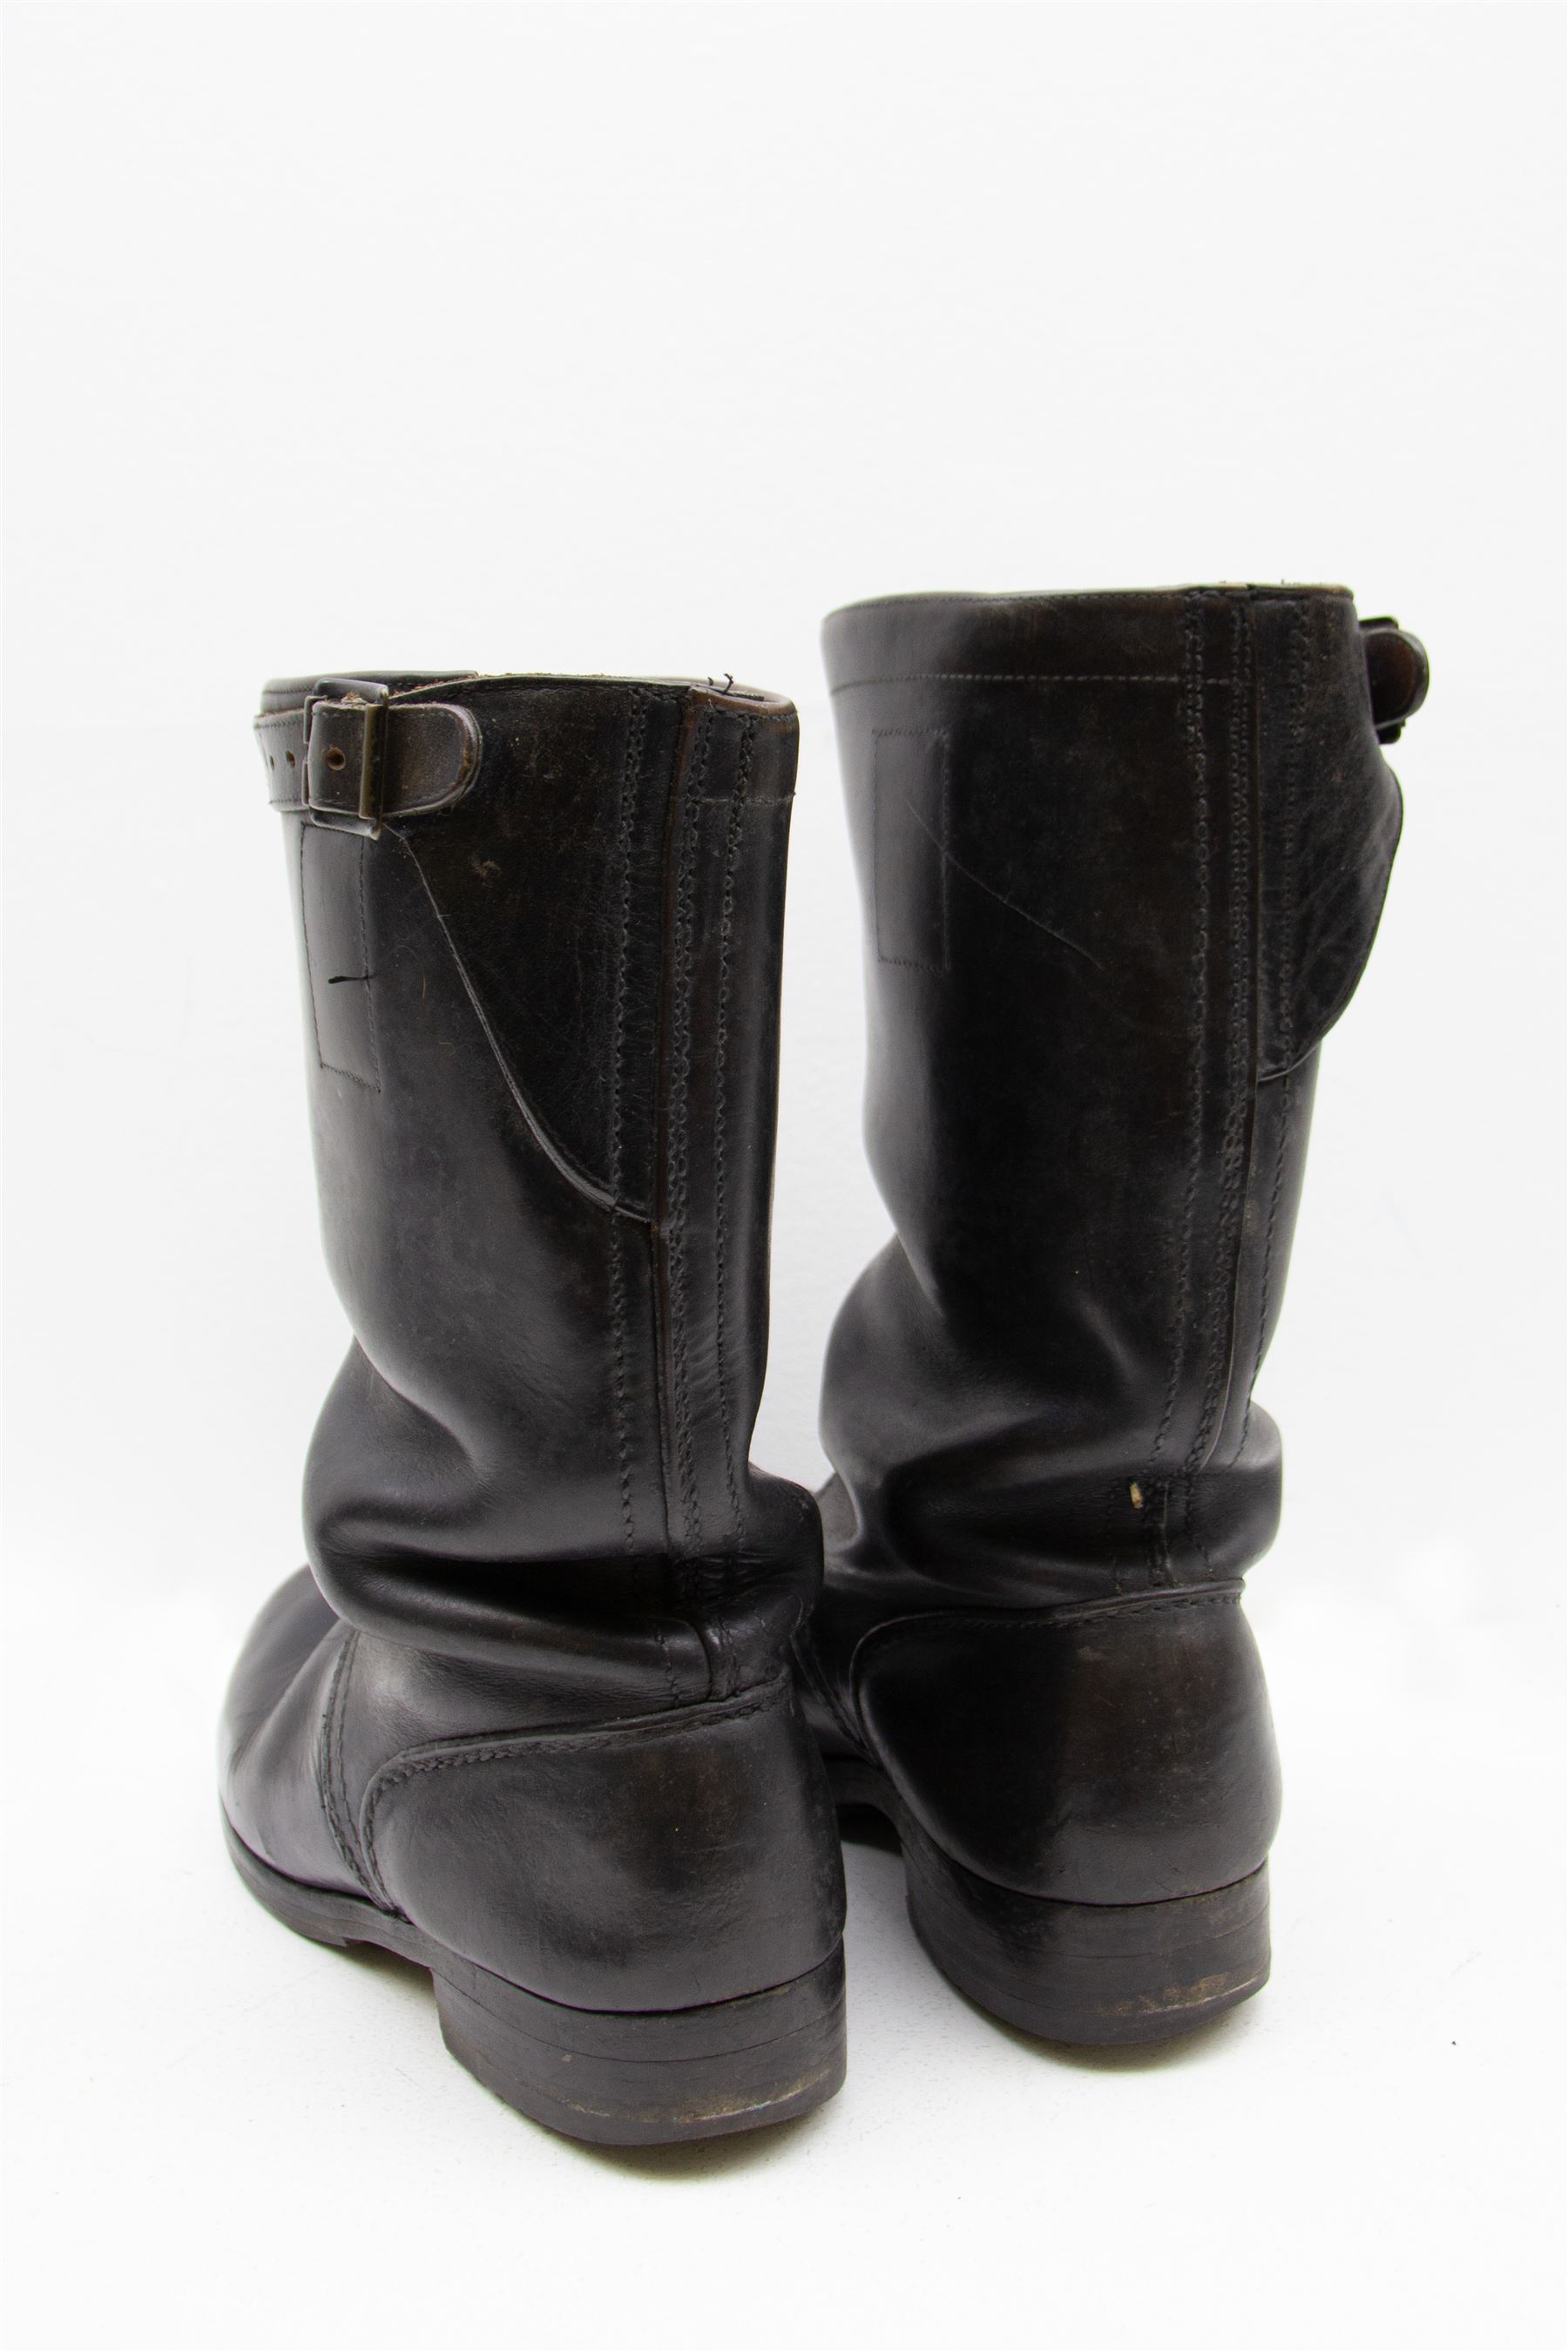 WWII German pair of black leather parade/jack boots with adjustable calf straps; both stamped Contin - Image 2 of 5